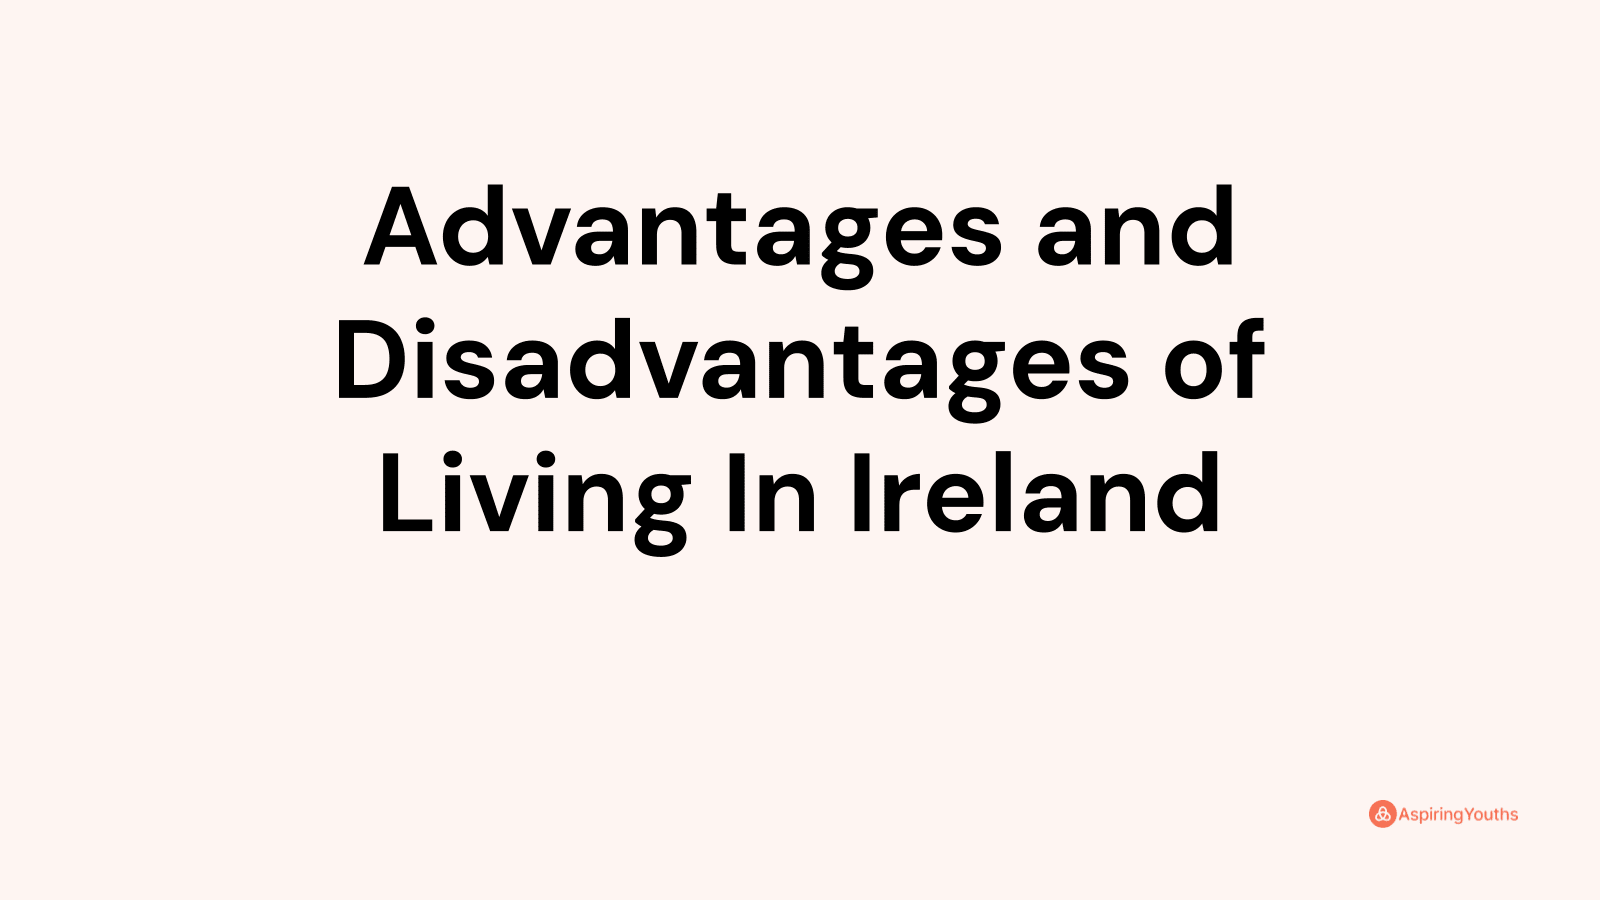 Advantages and disadvantages of Living In Ireland